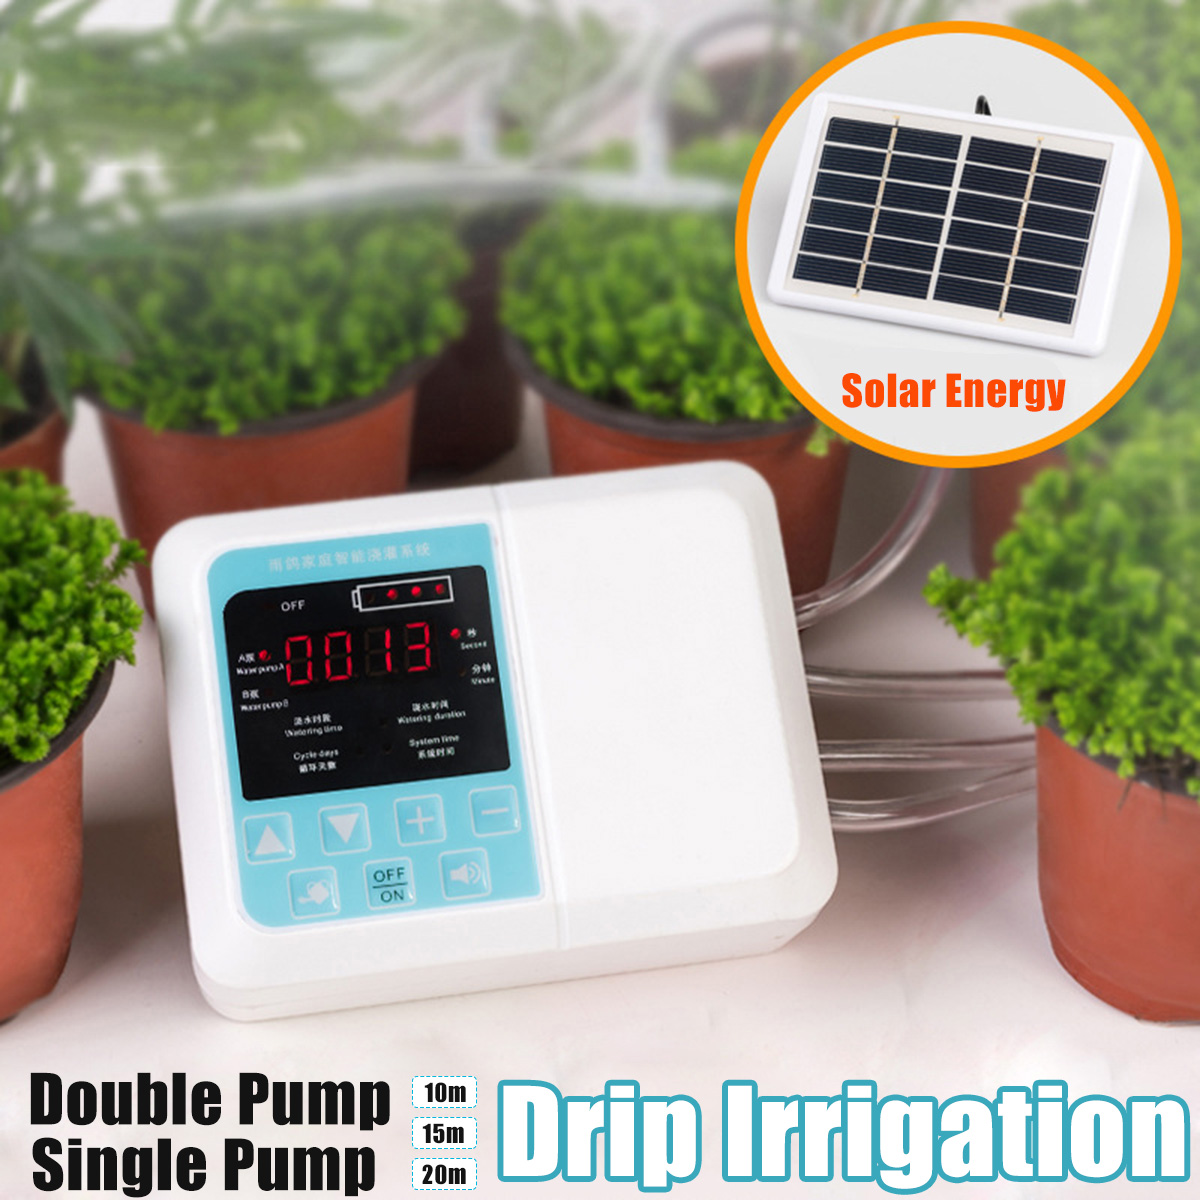 Multifunctional-Solar-Energy-Automatic-Plants-Watering-Device-Intelligent-Timing-Irrigation-Timer-Ga-1548930